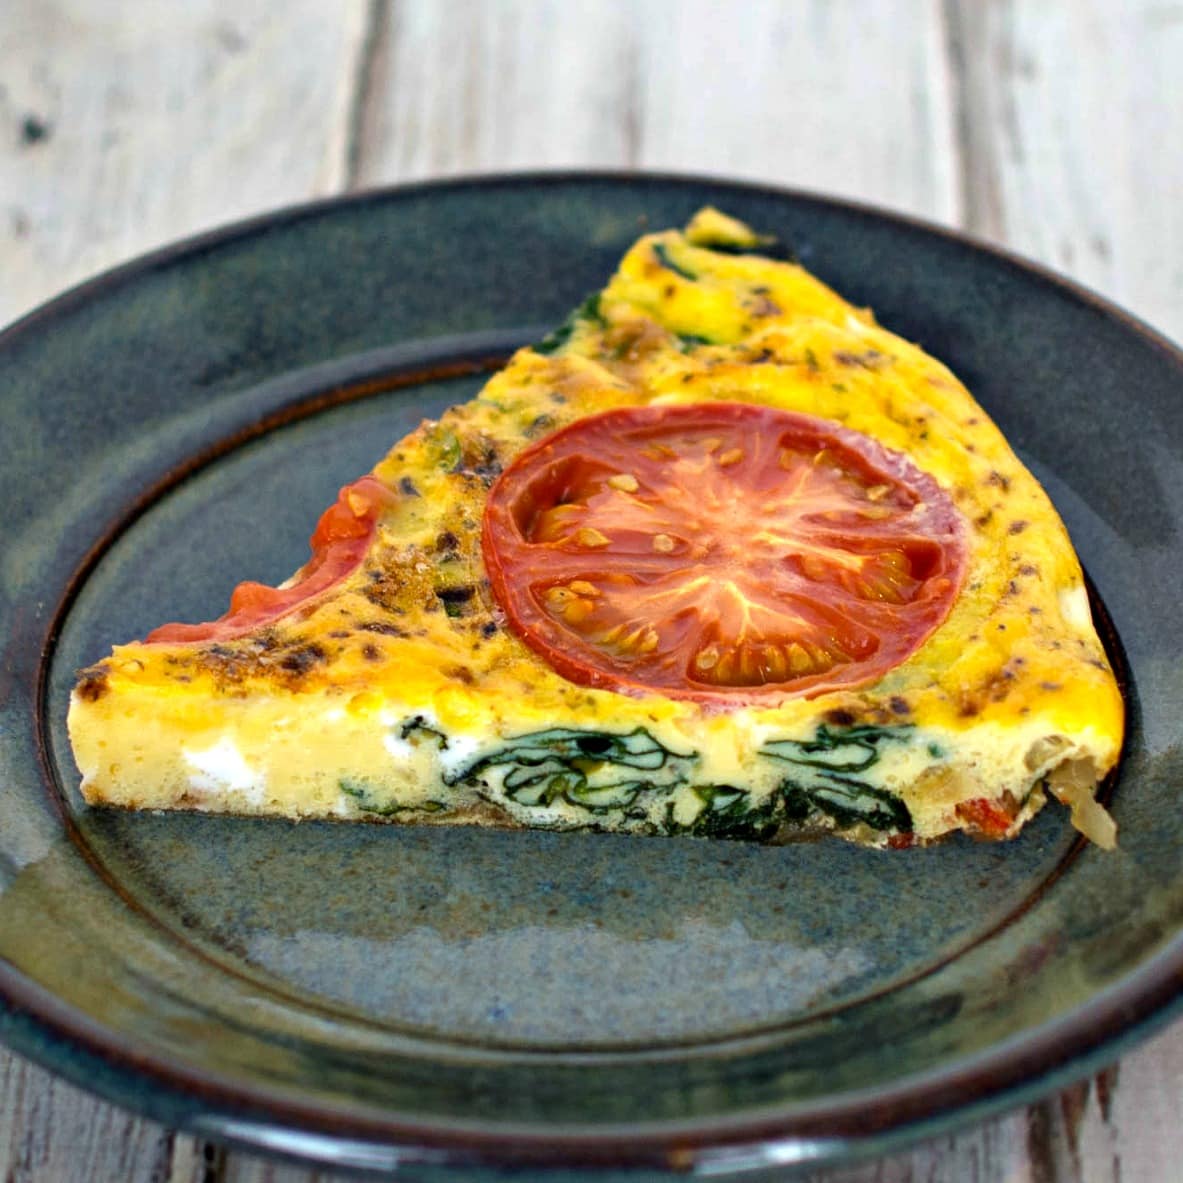 A slice of spinach and tomato quiche on a plate.